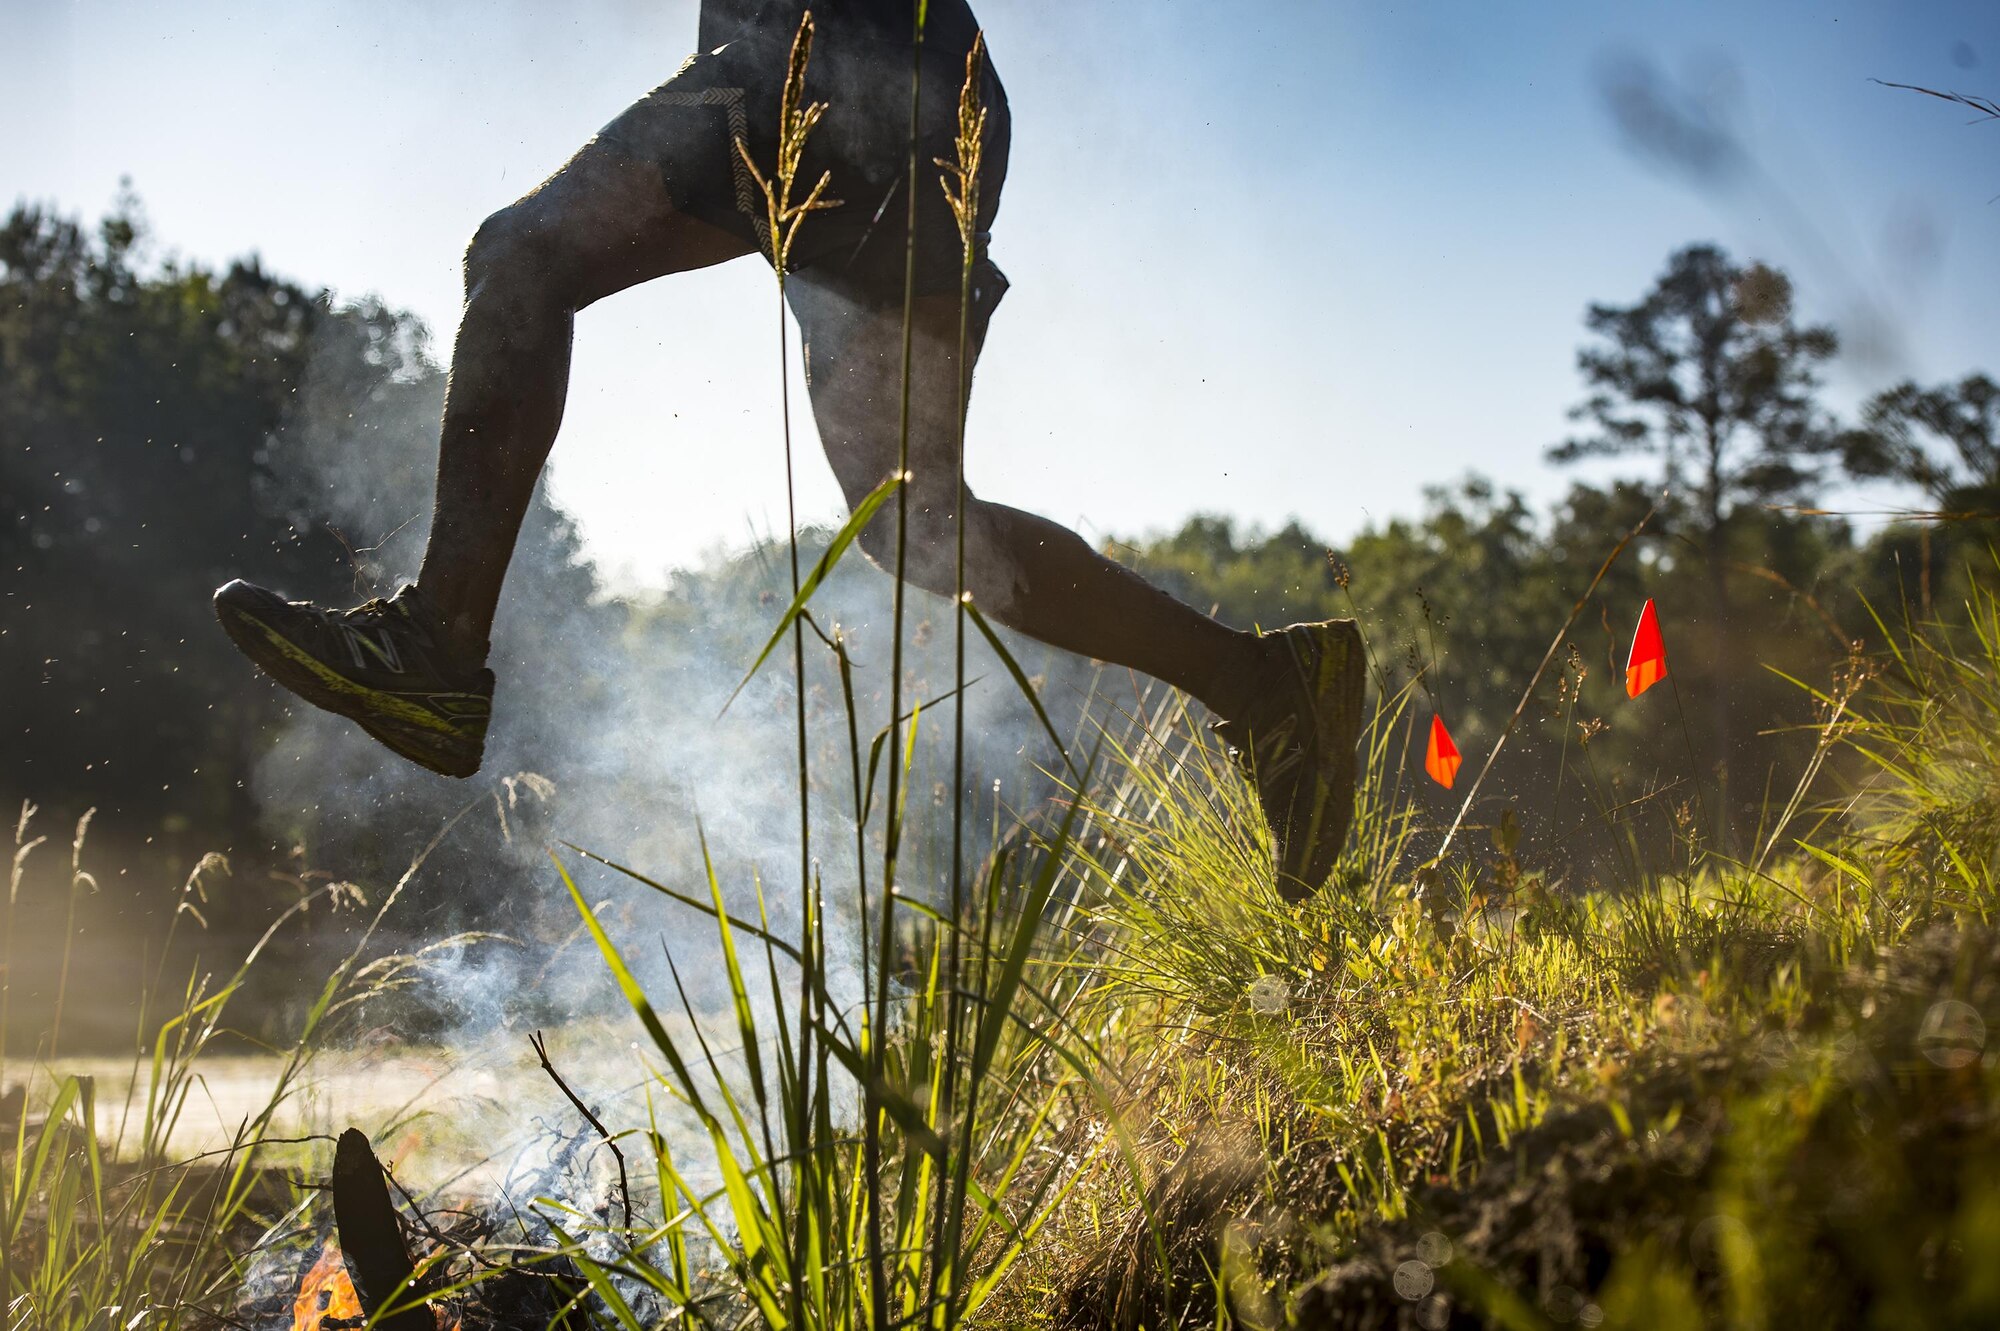 A runner jumps over a fire during the 2016 Moody Mudder, May 7, 2016, in Ray City, Ga. The Mudder challenged nearly 500 competitors to complete 20 obstacles on a 3.12-mile course for the third year in a row. (U.S. Air Force photo by Senior Airman Ryan Callaghan/Released)